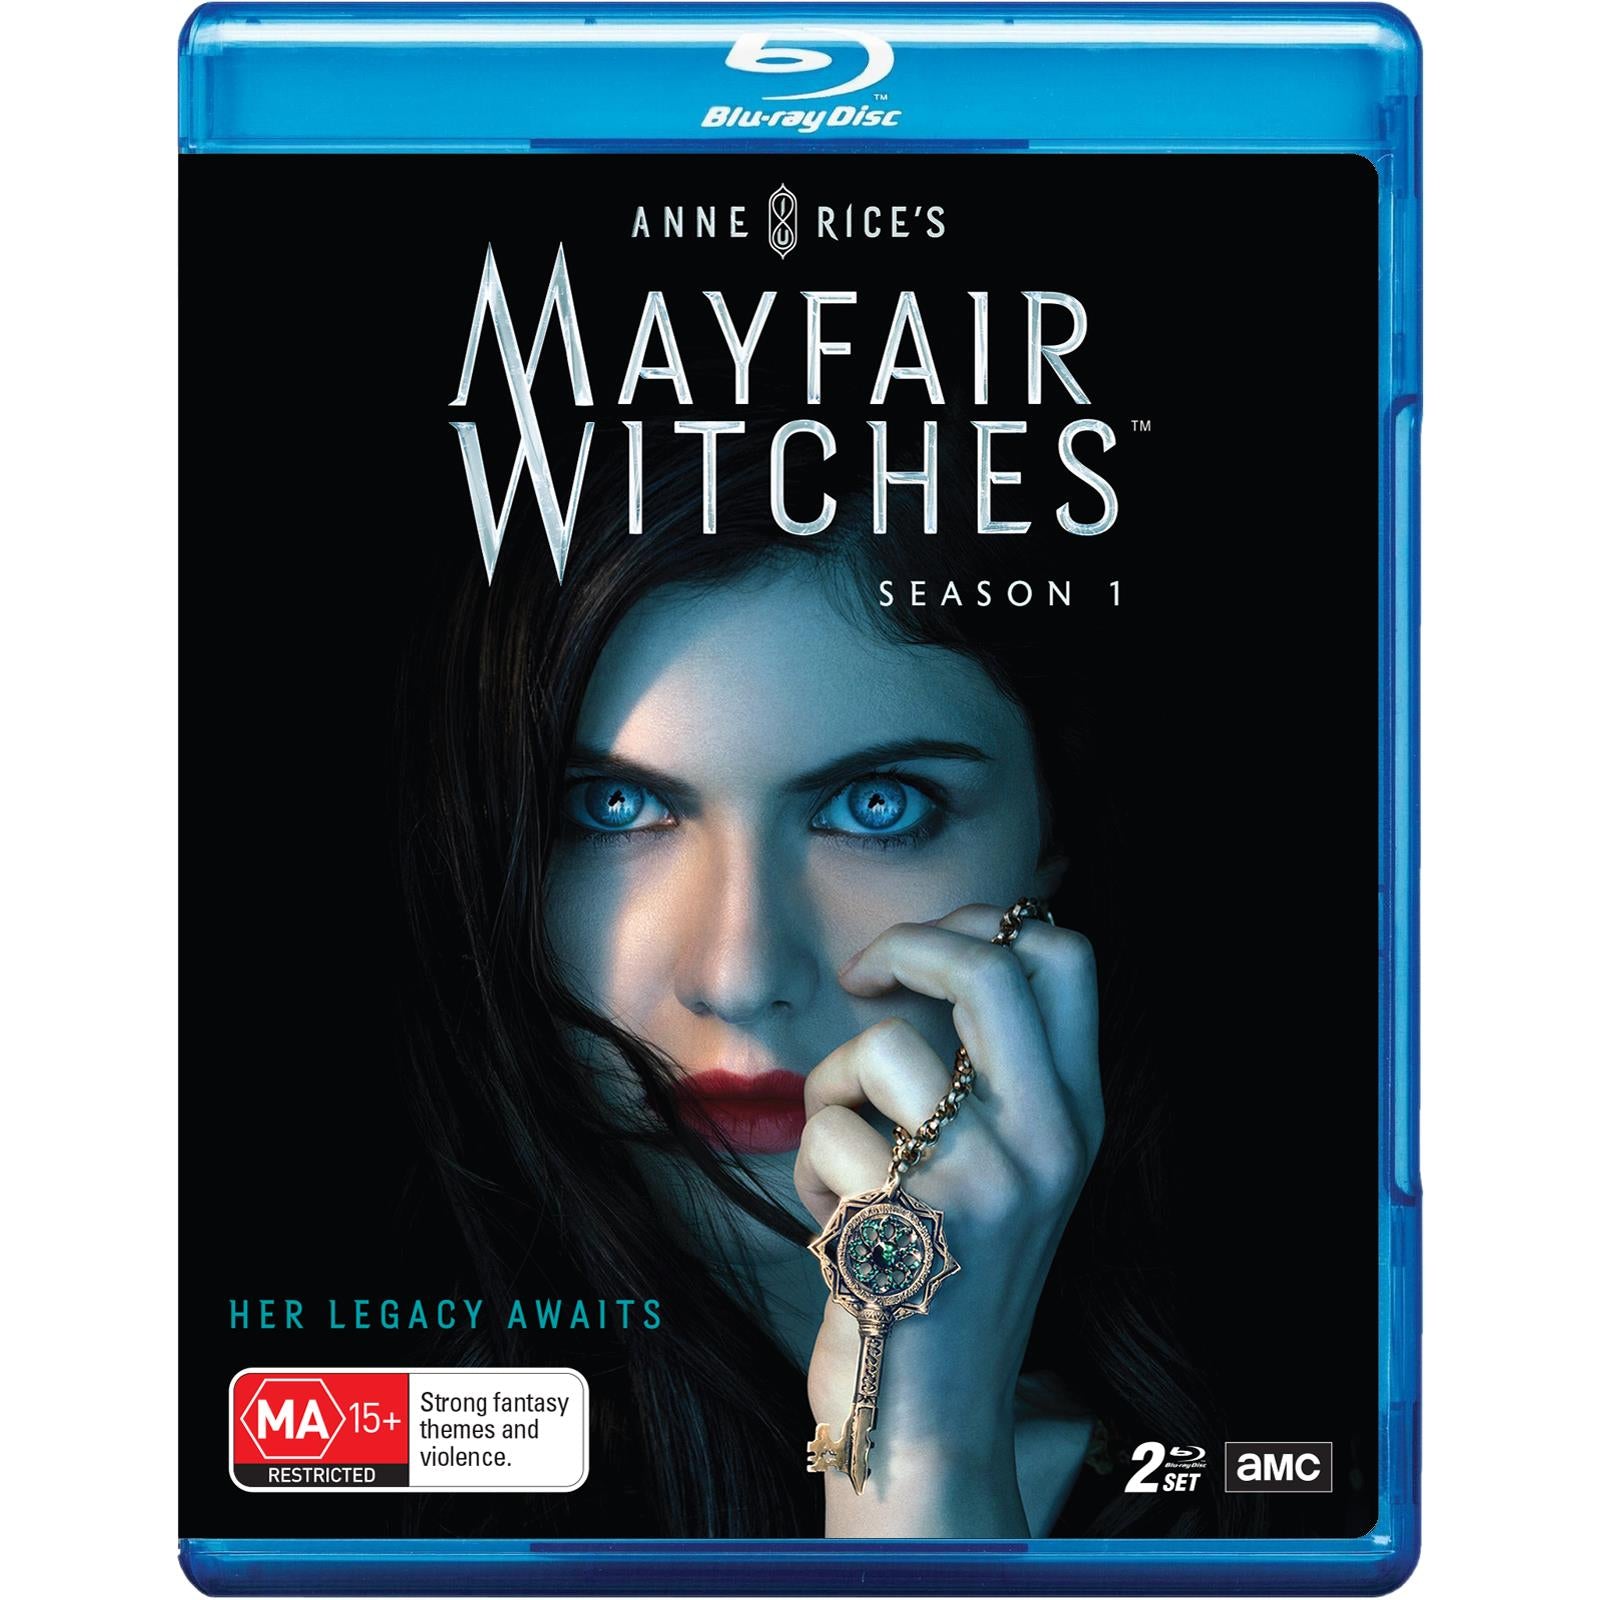 anne rice's mayfair witches - season 1